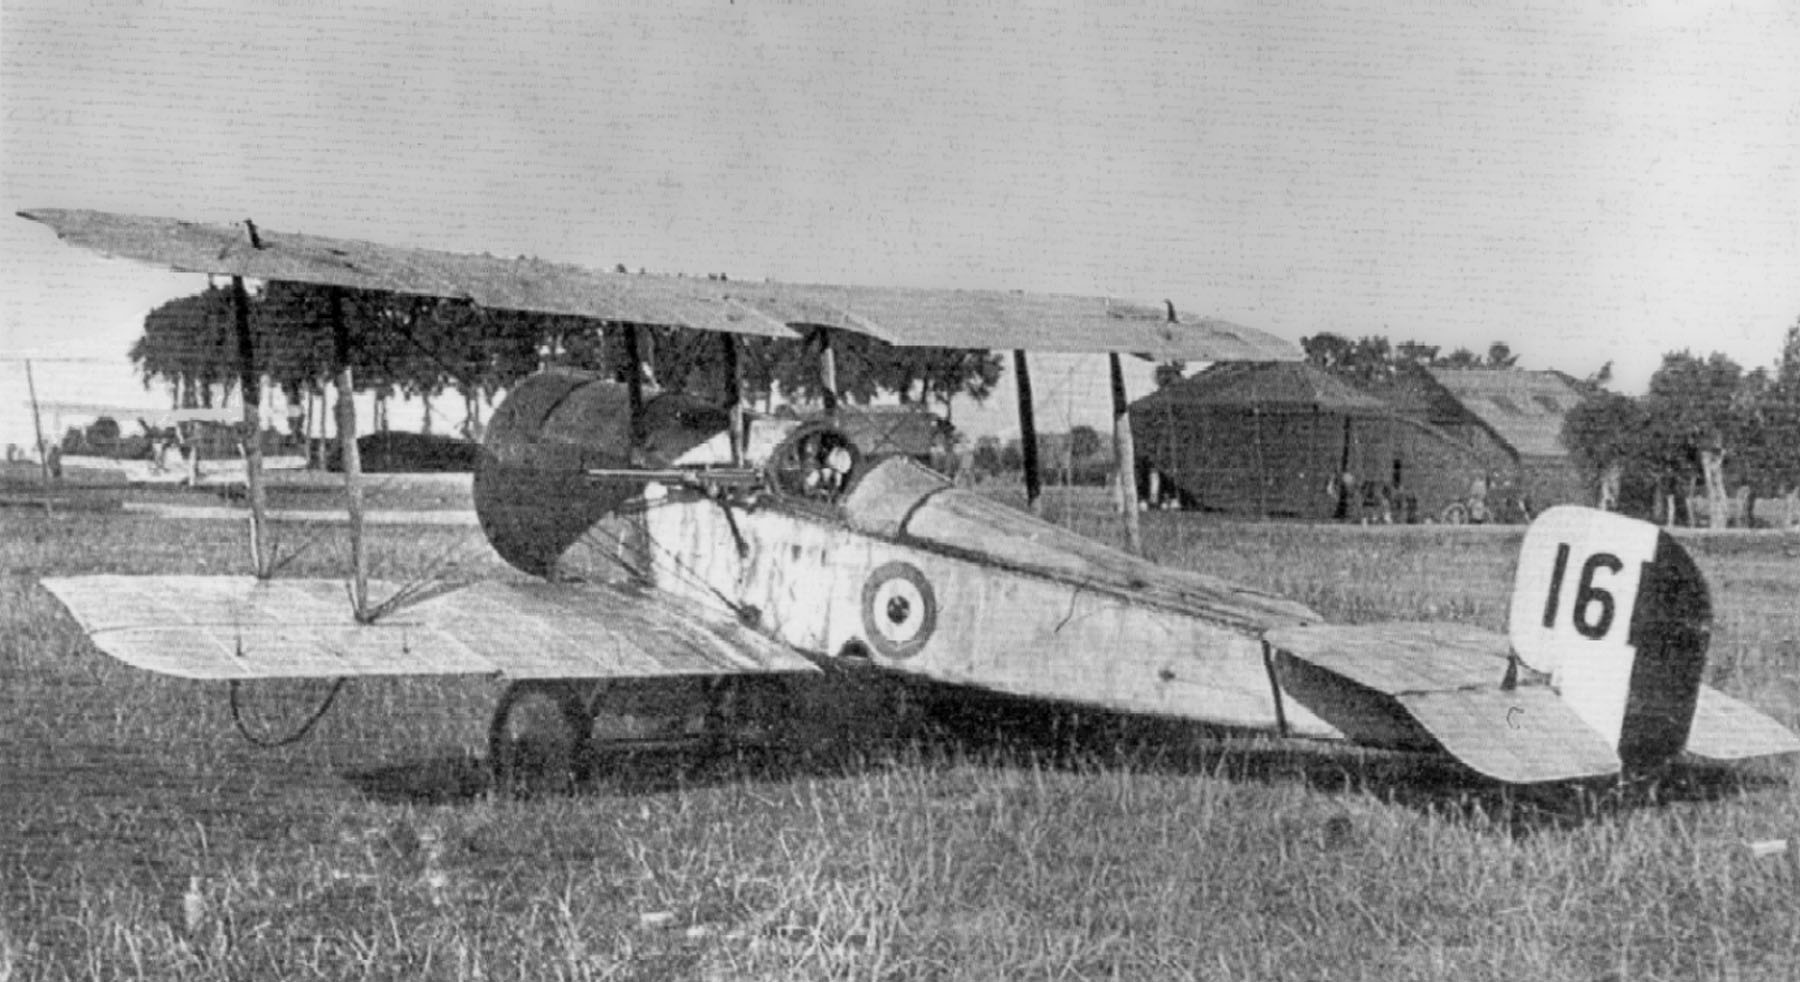  Captain Hawker's Bristol Scout C, No. 1611, in which he destroyed three enemy aircraft in aerial combat, 25 July 1915. In this photograph, the angled placement of Hawker's Lewis machine gun is visible.